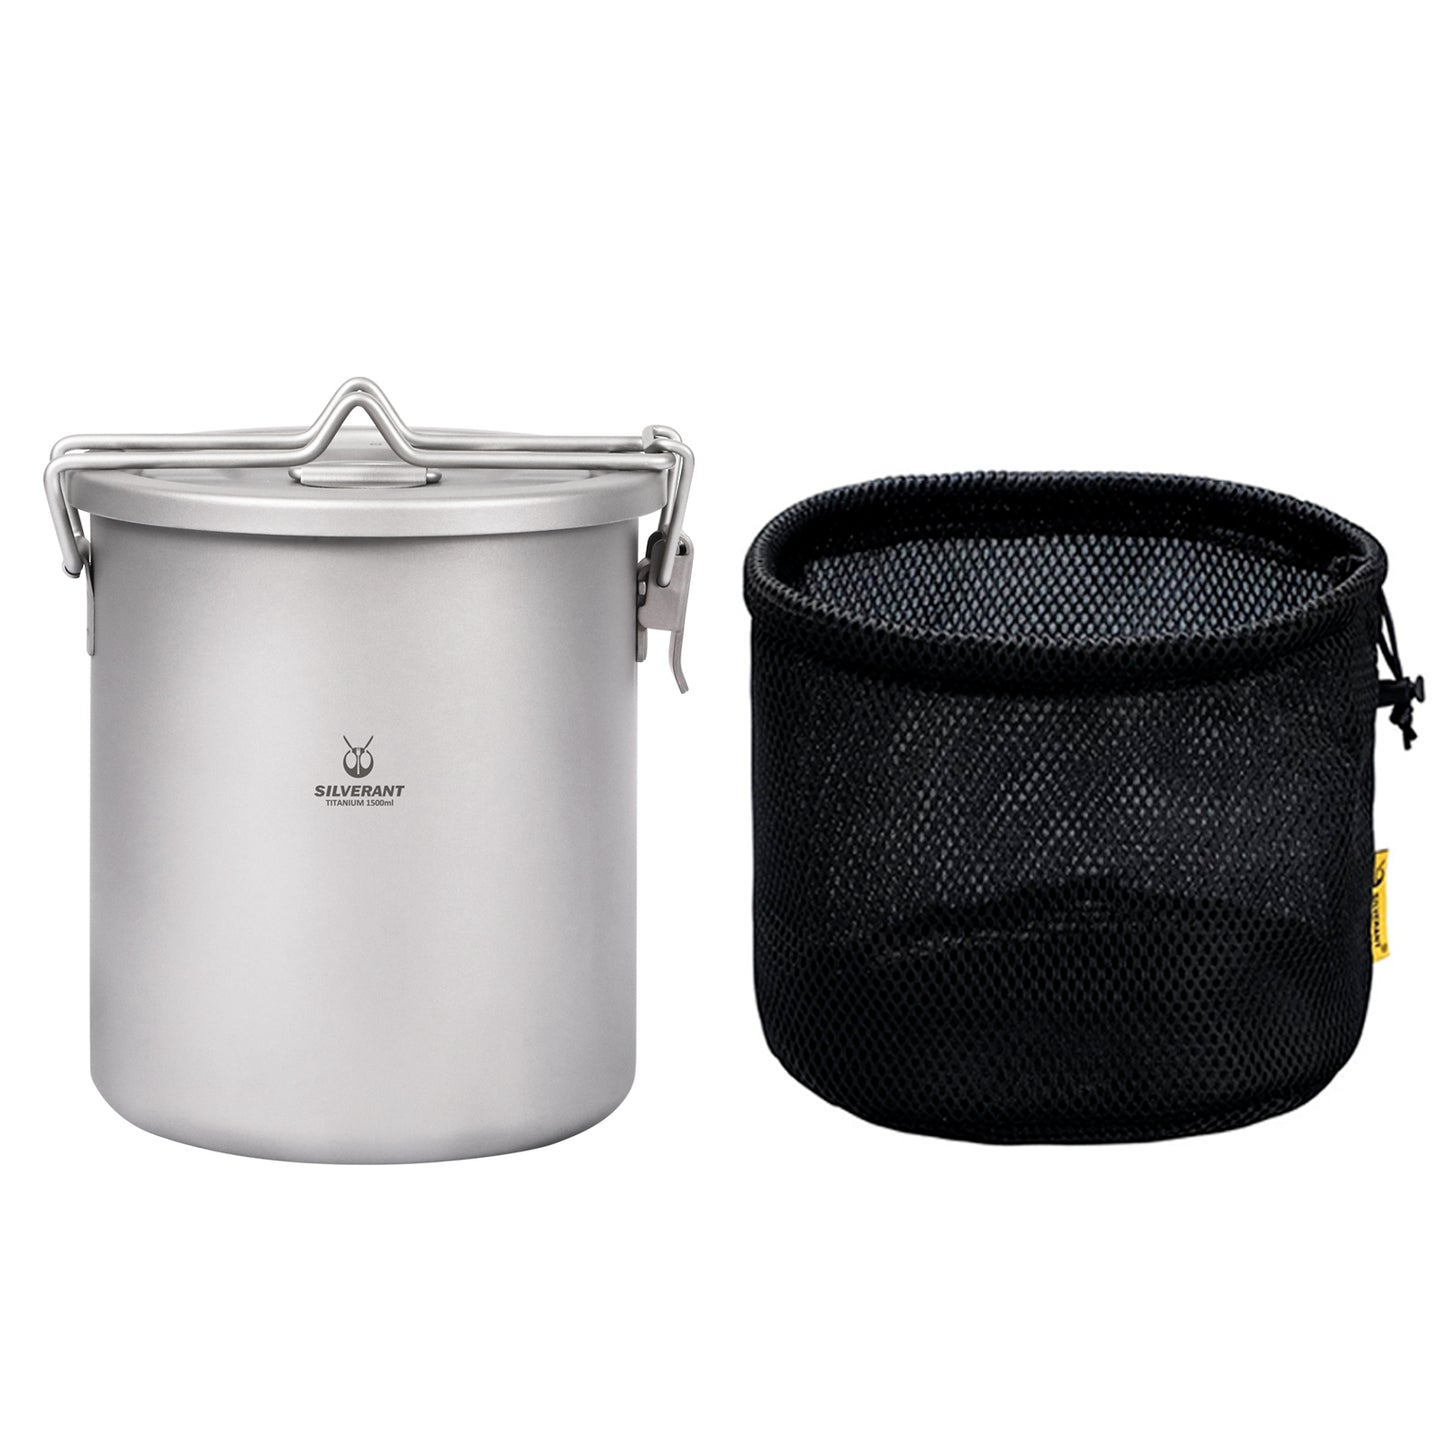 
                  
                    SilverAnt Titanium Rice Cooker with the drawstring meshbag
                  
                